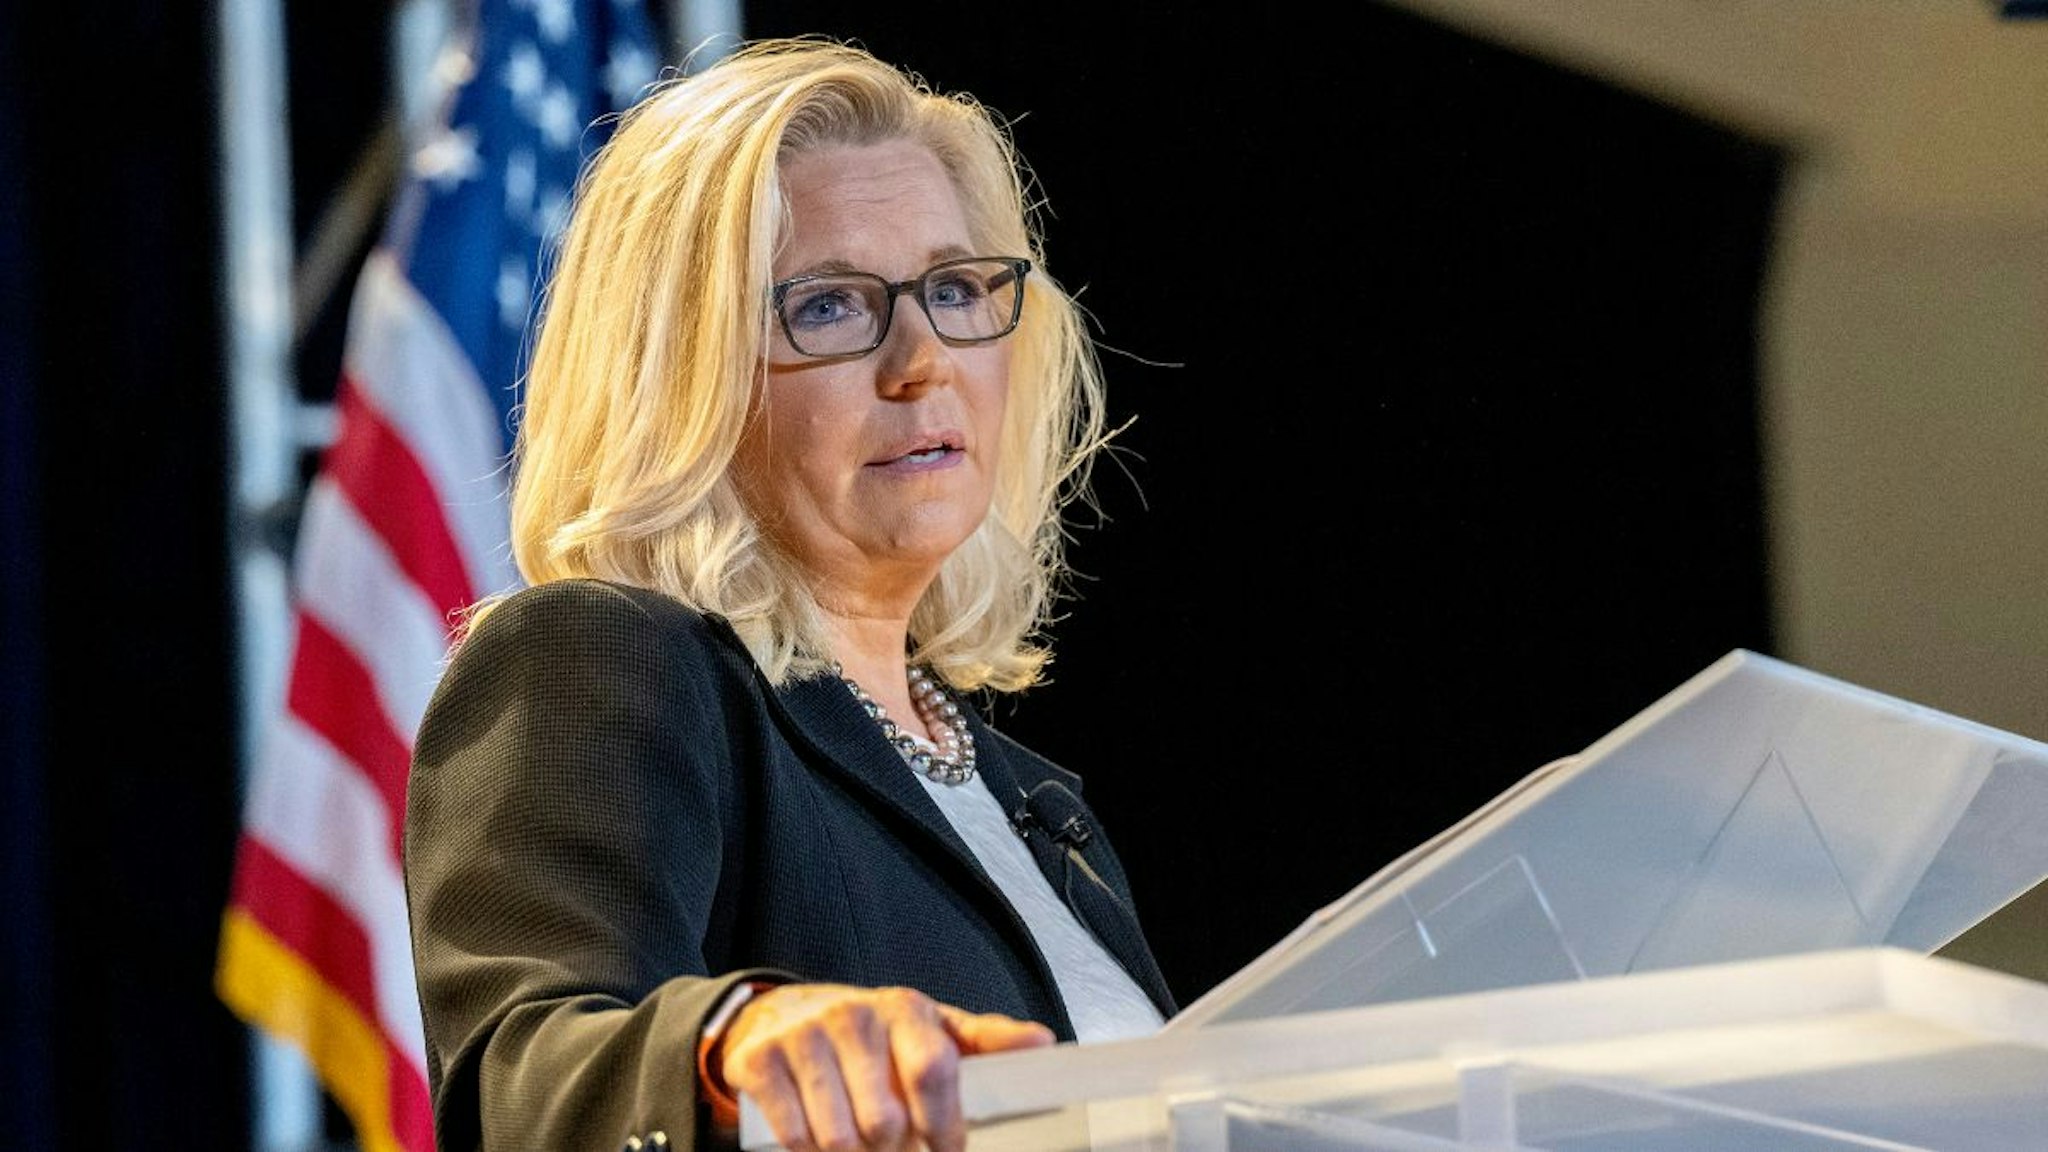 Congresswoman Liz Cheney speaks at the Ronald Reagan Presidential Library in Simi Valley Wednesday, June 29, 2022.